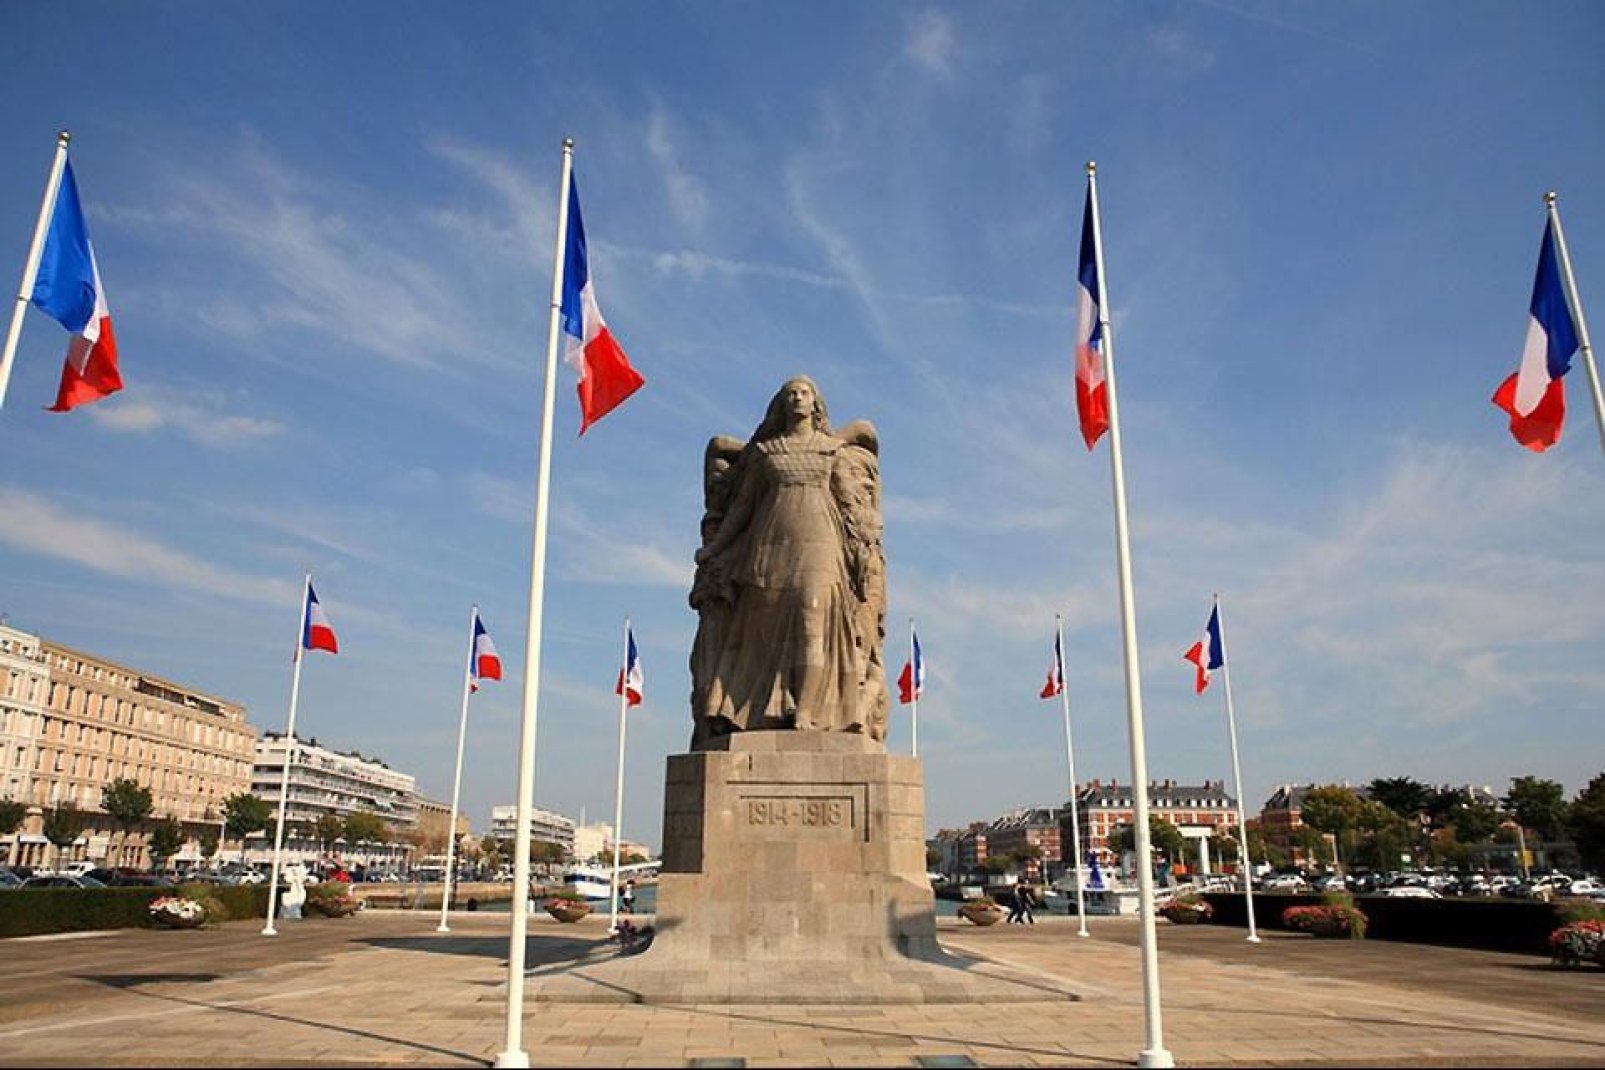 Destroyed during the Second World War, the city centre of Le Havre was entirely rebuilt between 1945 and 1964. It now appears on the UNESCO World Heritage List.